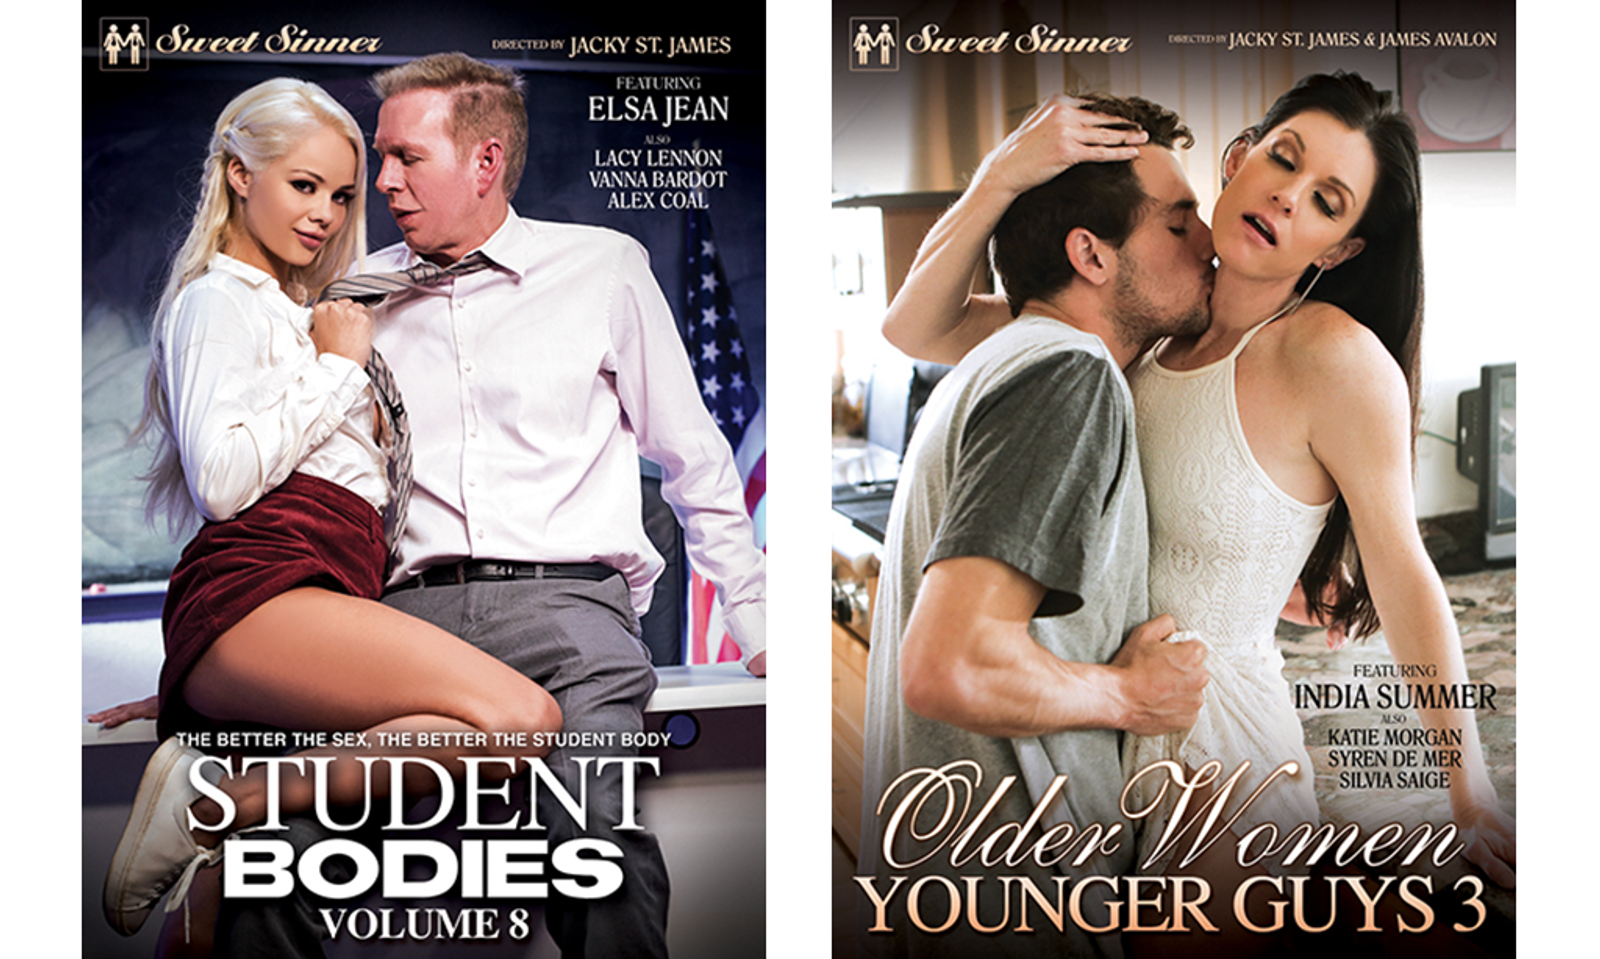 ‘Student Bodies 8’ & ‘Older Women, Younger Guys 3’ Head to DVD